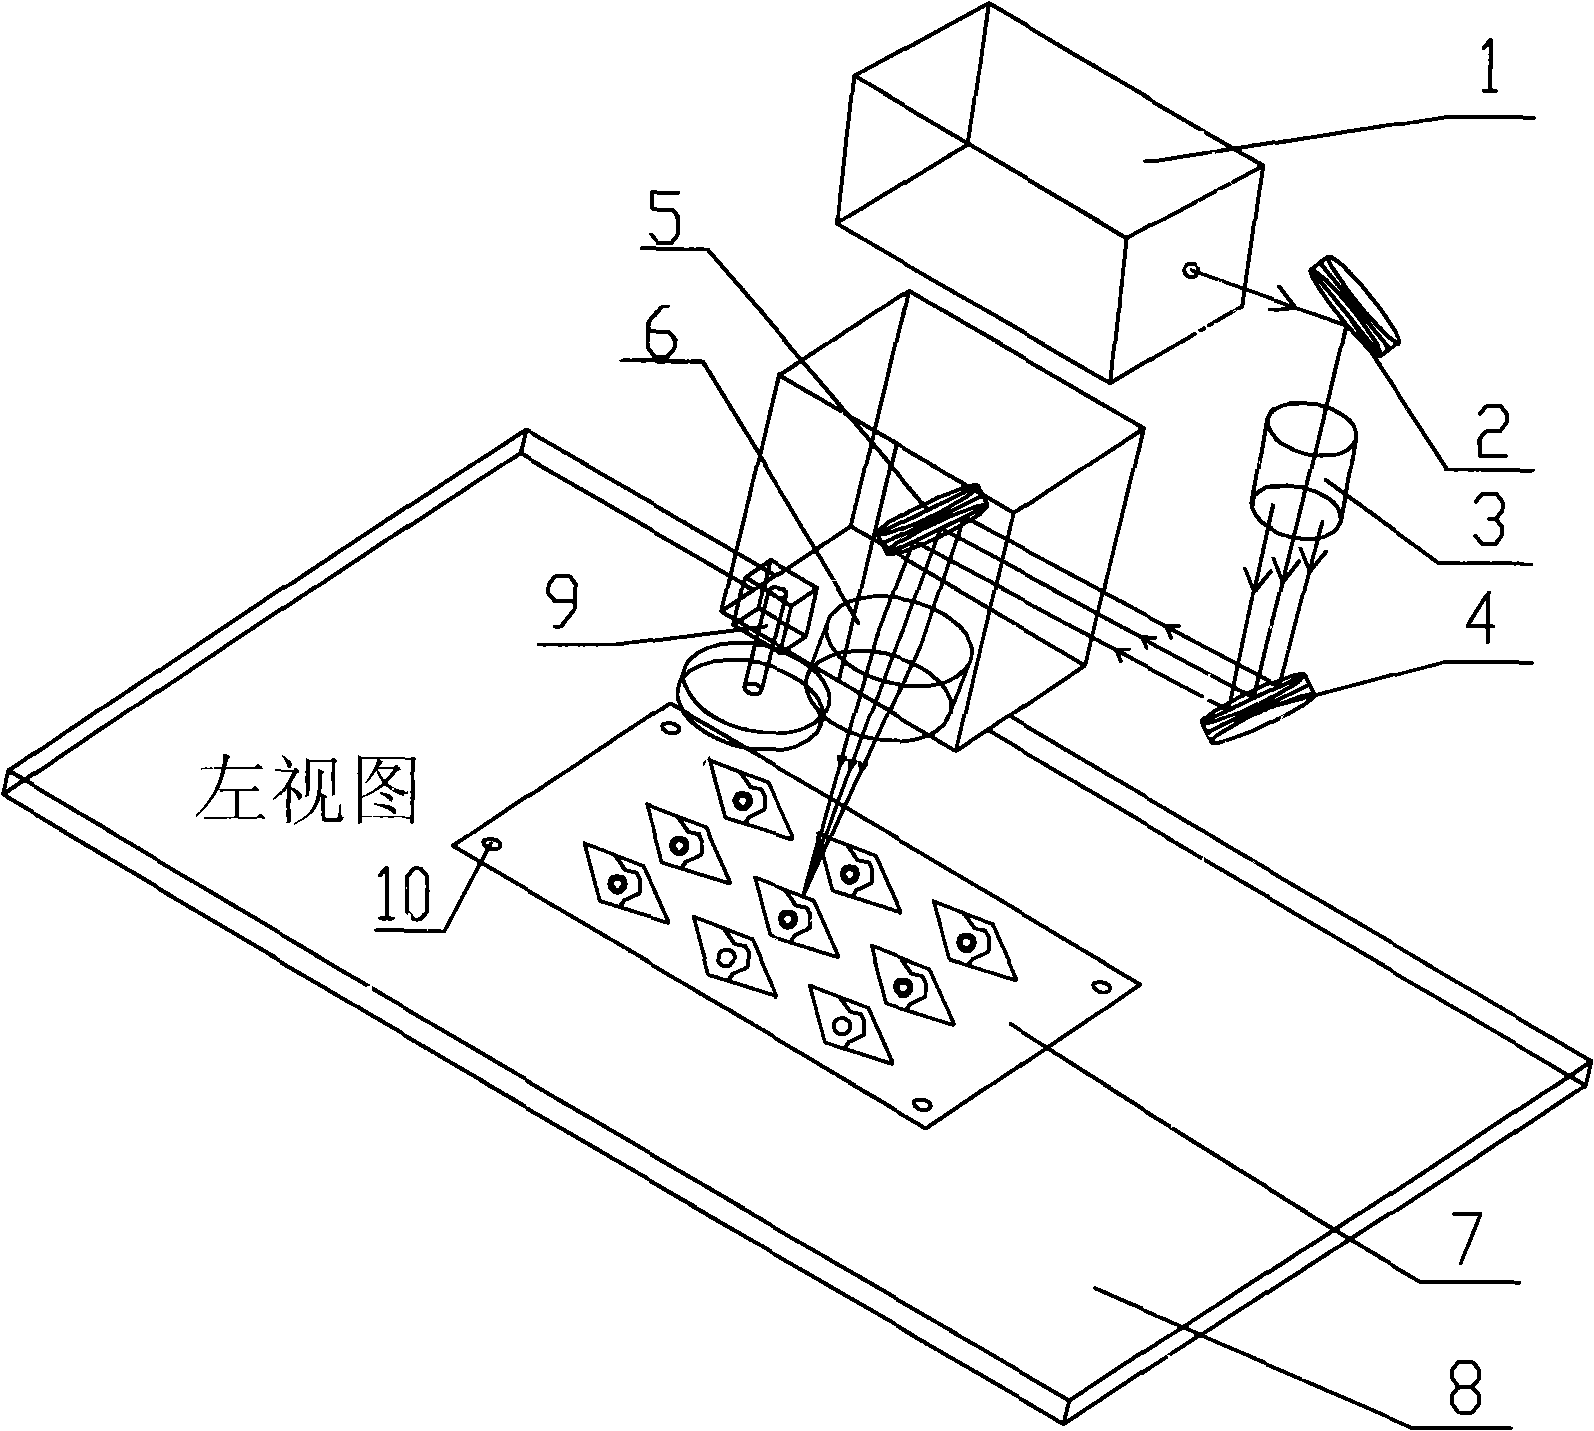 Laser device for cutting